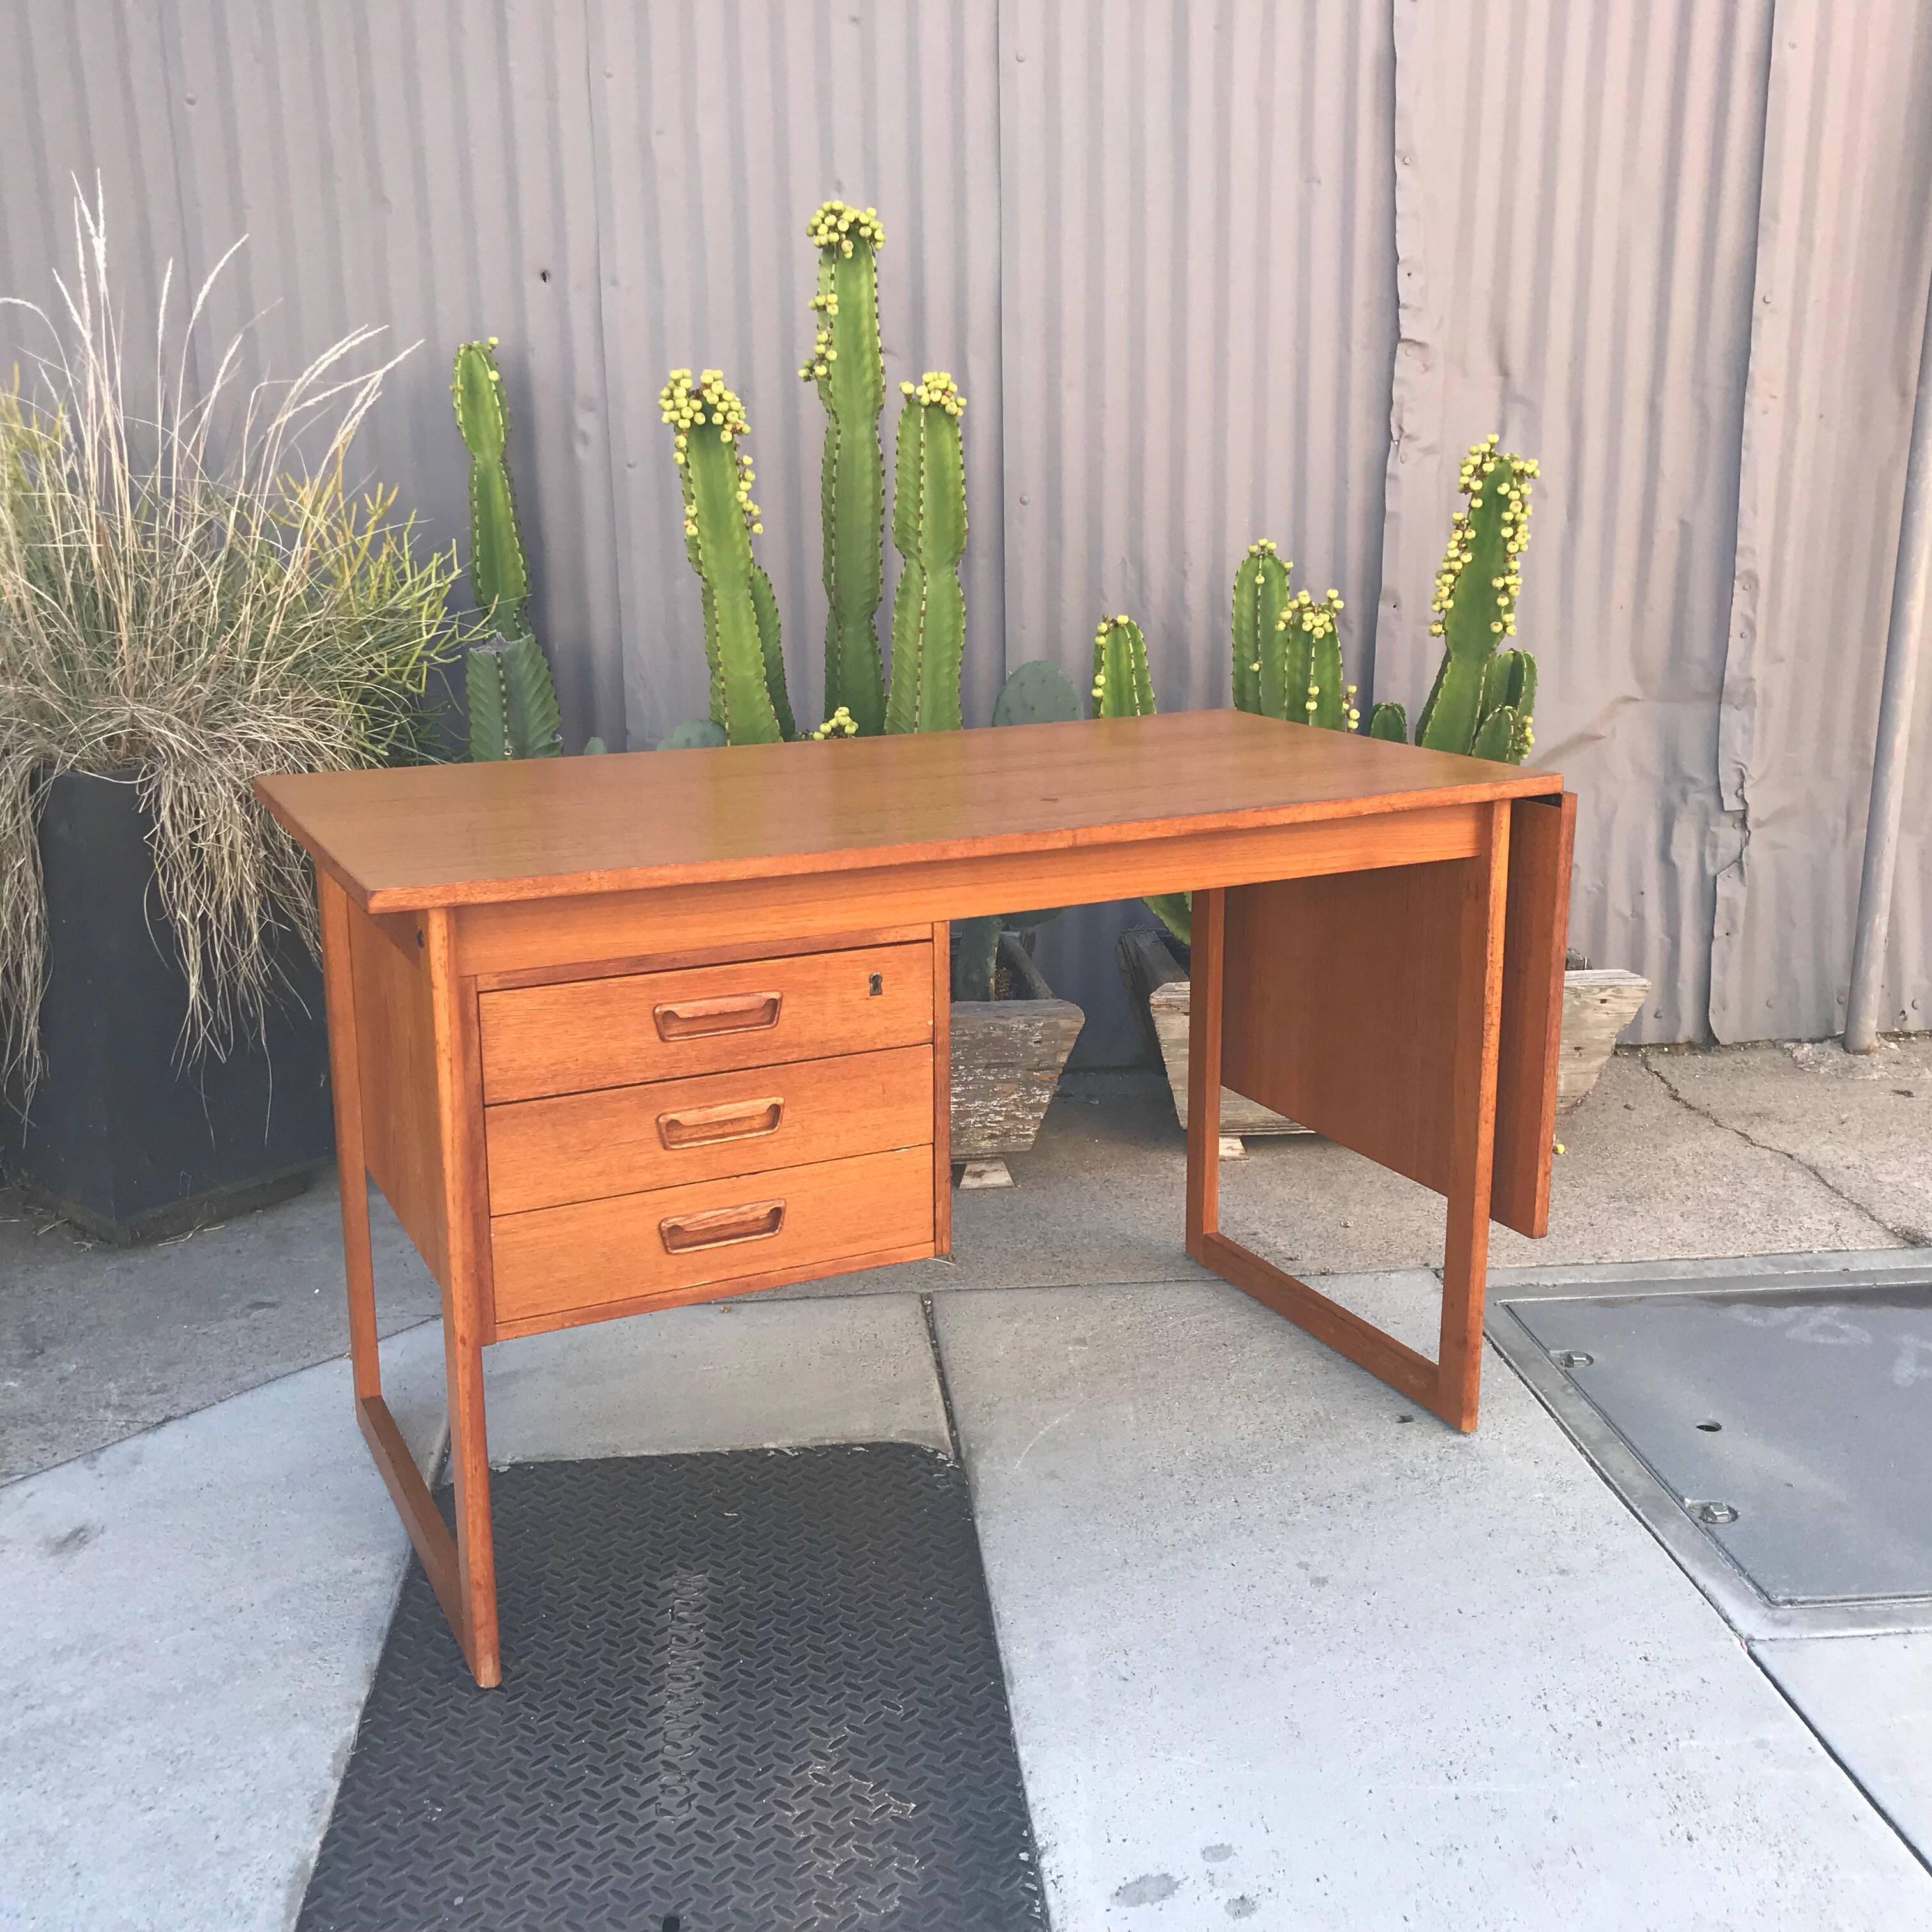 For your consideration a midcentury Danish modern teak desk.

Dimensions: 66 3/8